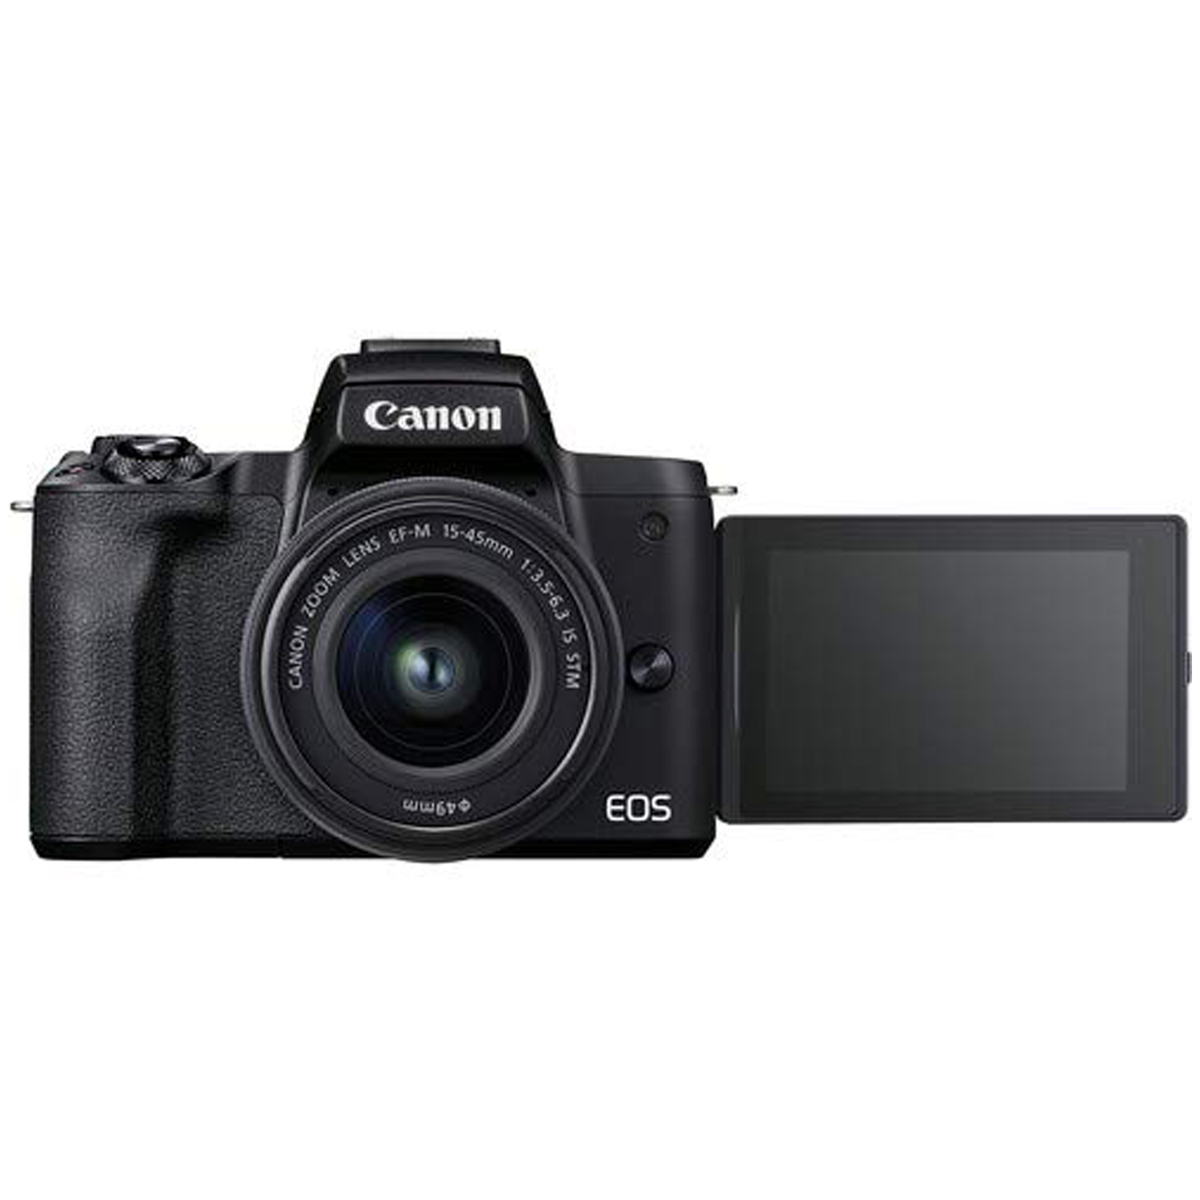 Canon EOS M50 Mark II 15-45mm f/3.5-6.3 IS STM DSLR Camera